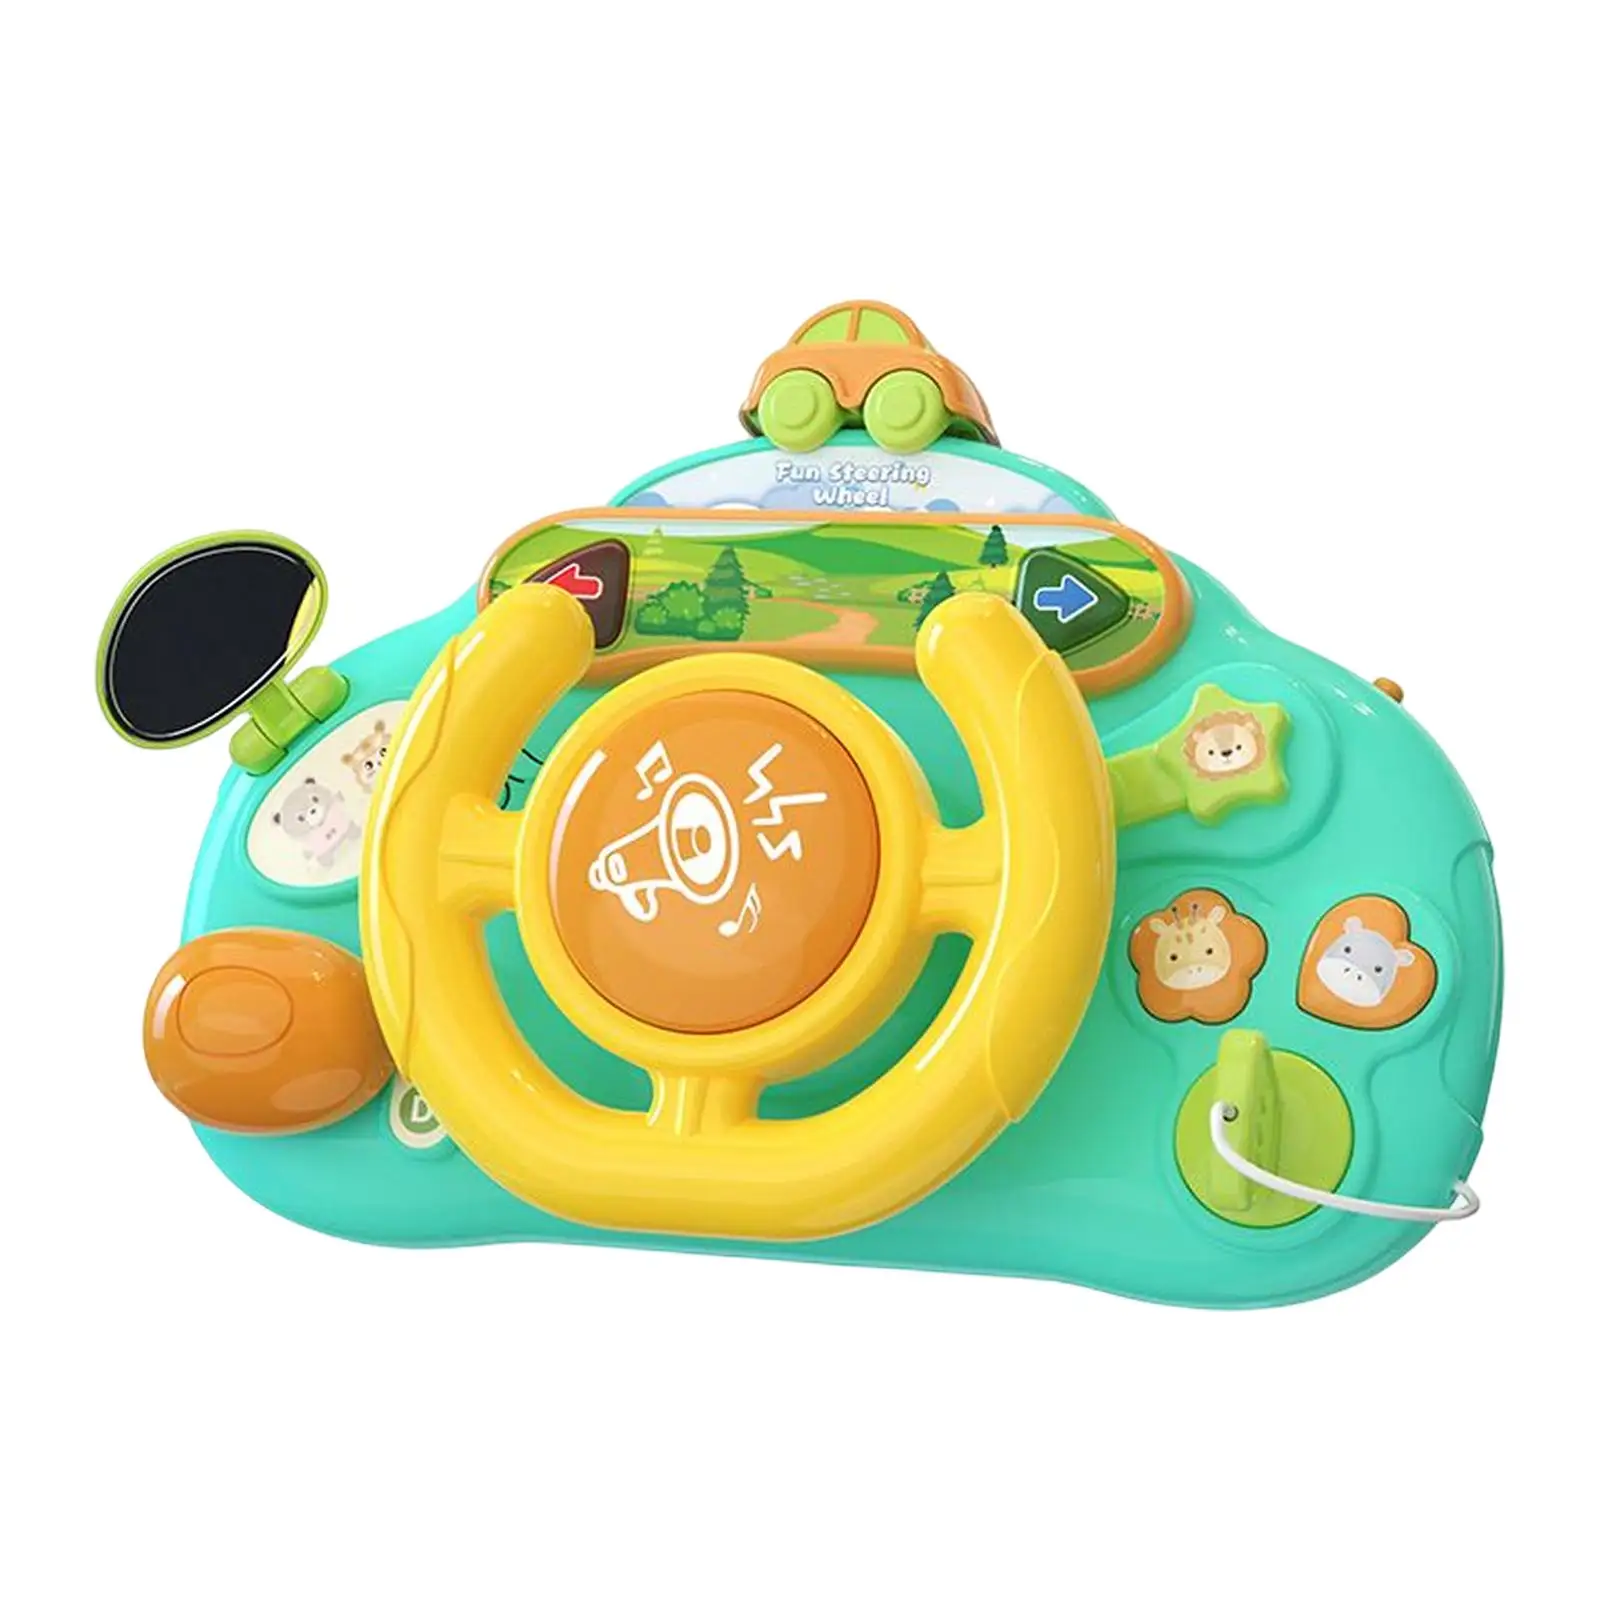 Simulated Driving Controller Musical Wheel Toy for Games Interaction Outdoor